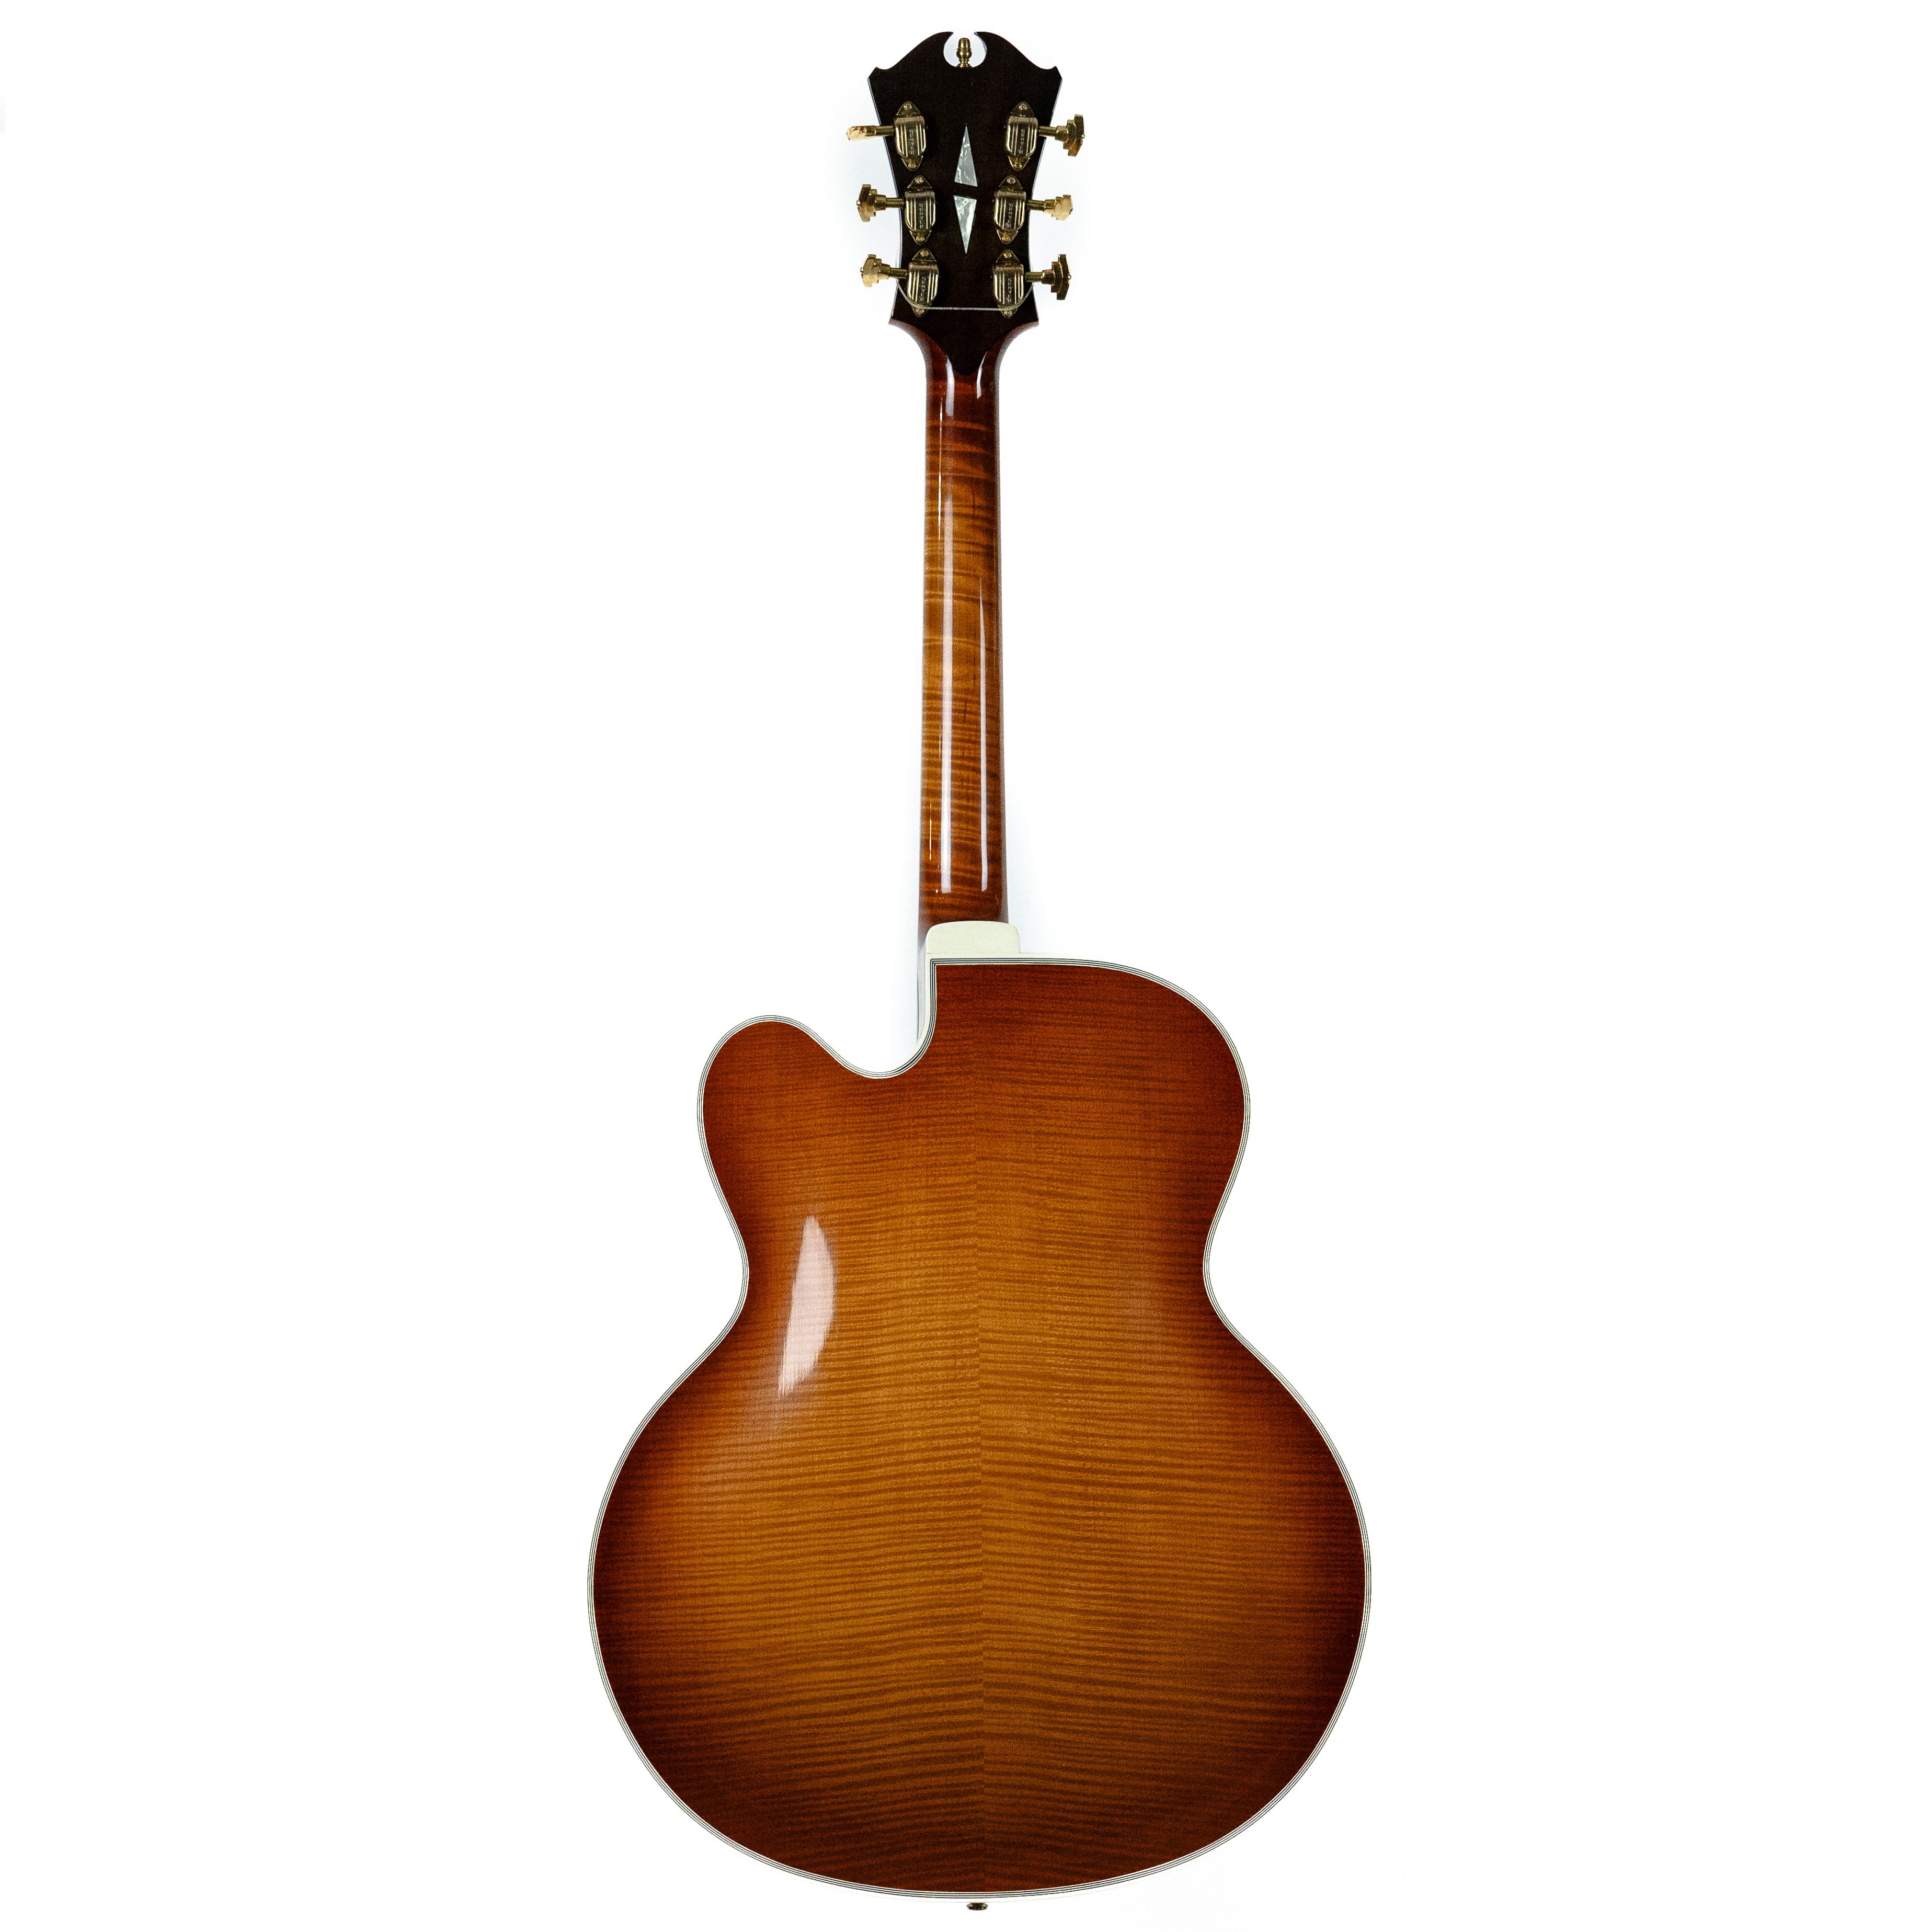 D'Aquisto 1971 New Yorker Special #1051, Amber Sunburst (Formerly owned by Johnny Smith)